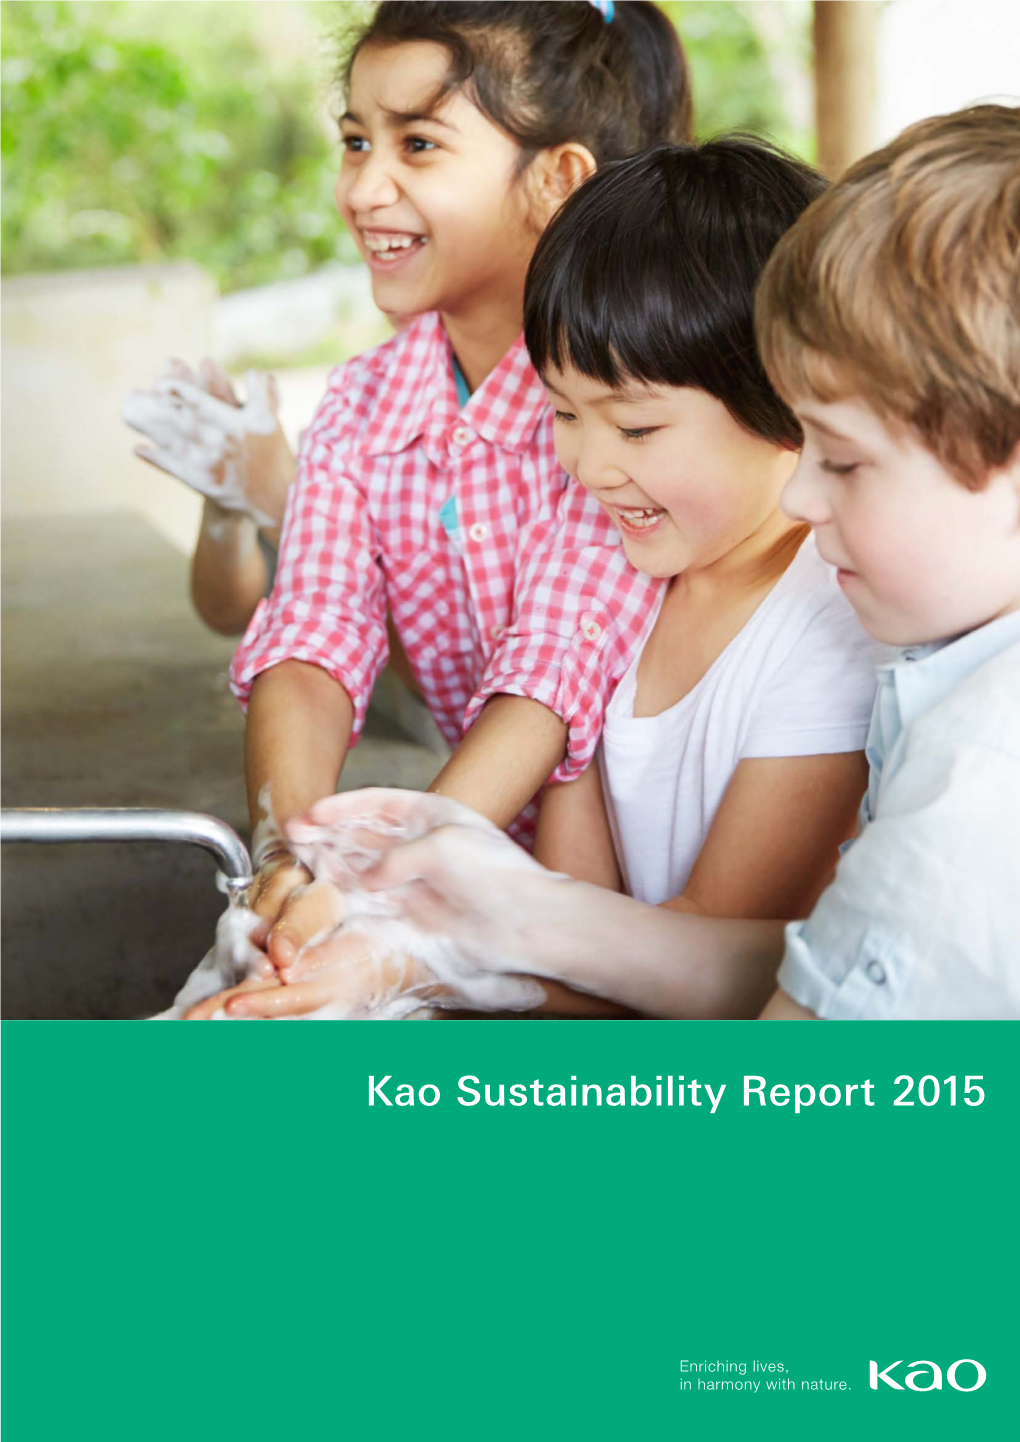 Kao Sustainability Report 2015 Contents CONTENTS ◀ 001 ▶ Contents